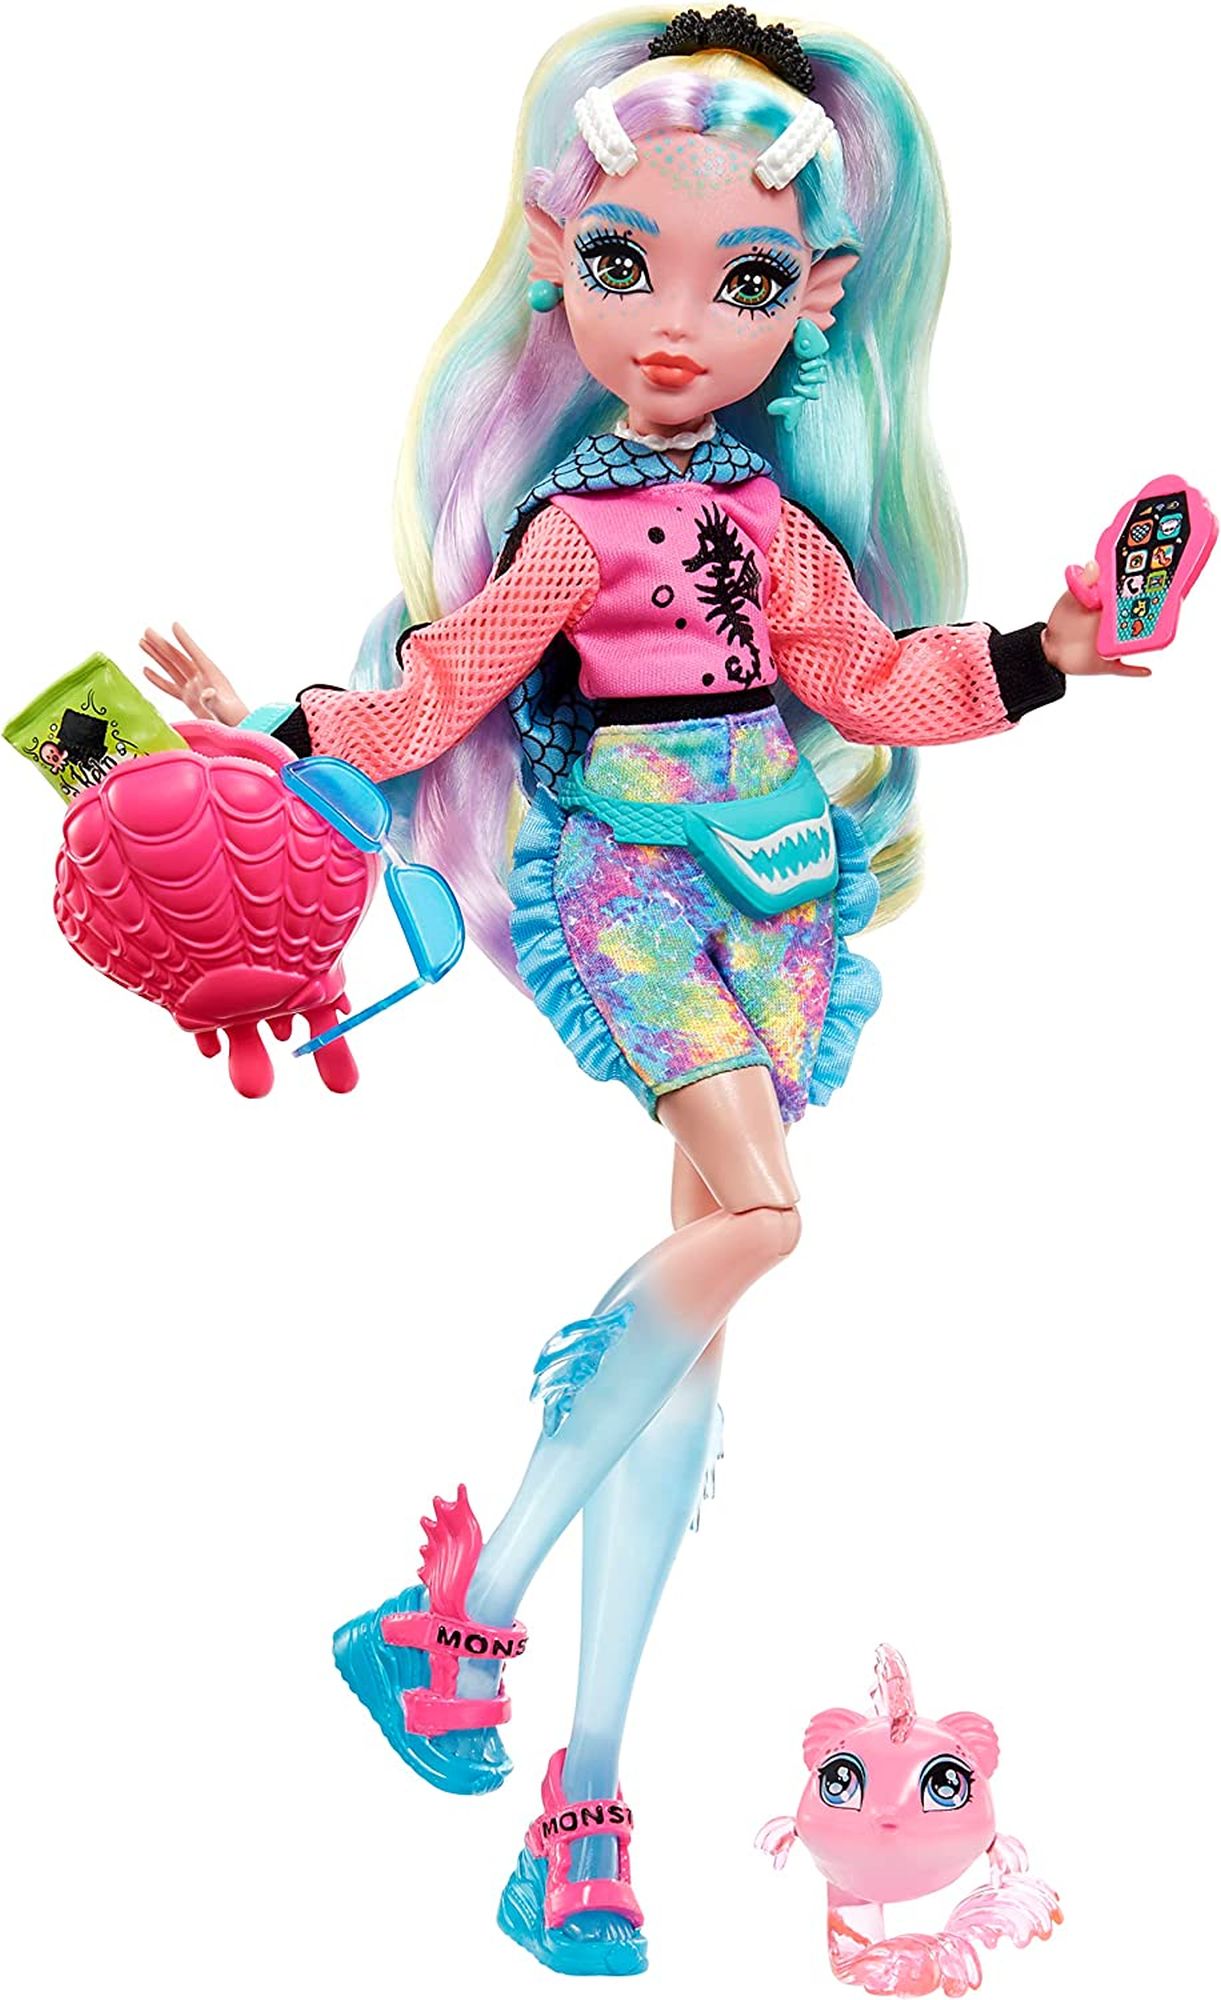 Monster High Doll, Lagoona Blue With Accessories And Pet Piranha, Posable Fashion Doll With Colorful Streaked Hair